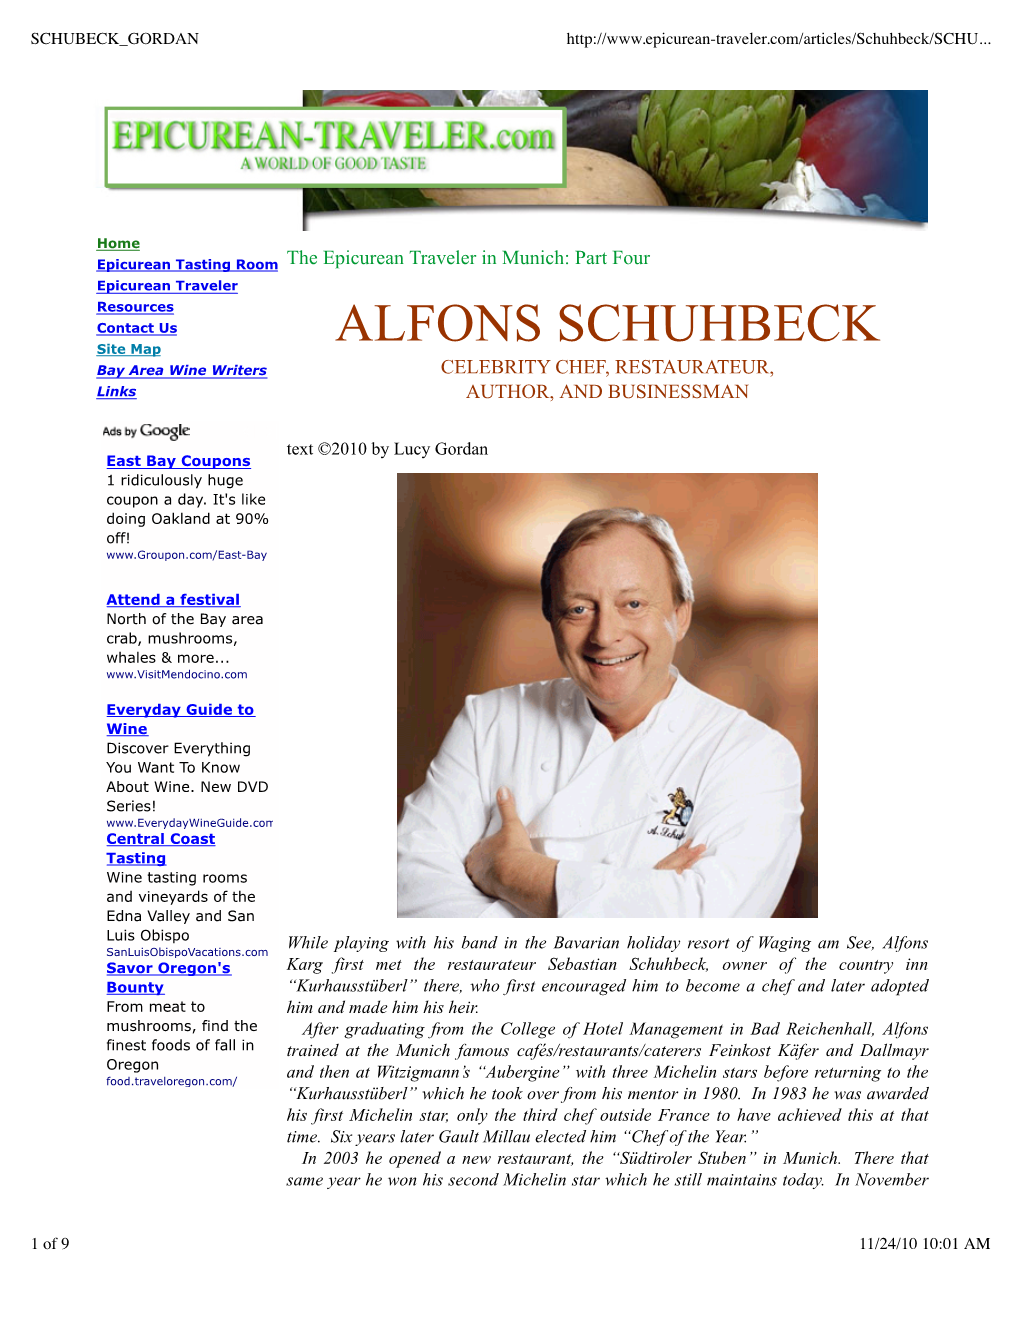 ALFONS SCHUHBECK Site Map Bay Area Wine Writers CELEBRITY CHEF, RESTAURATEUR, Links AUTHOR, and BUSINESSMAN